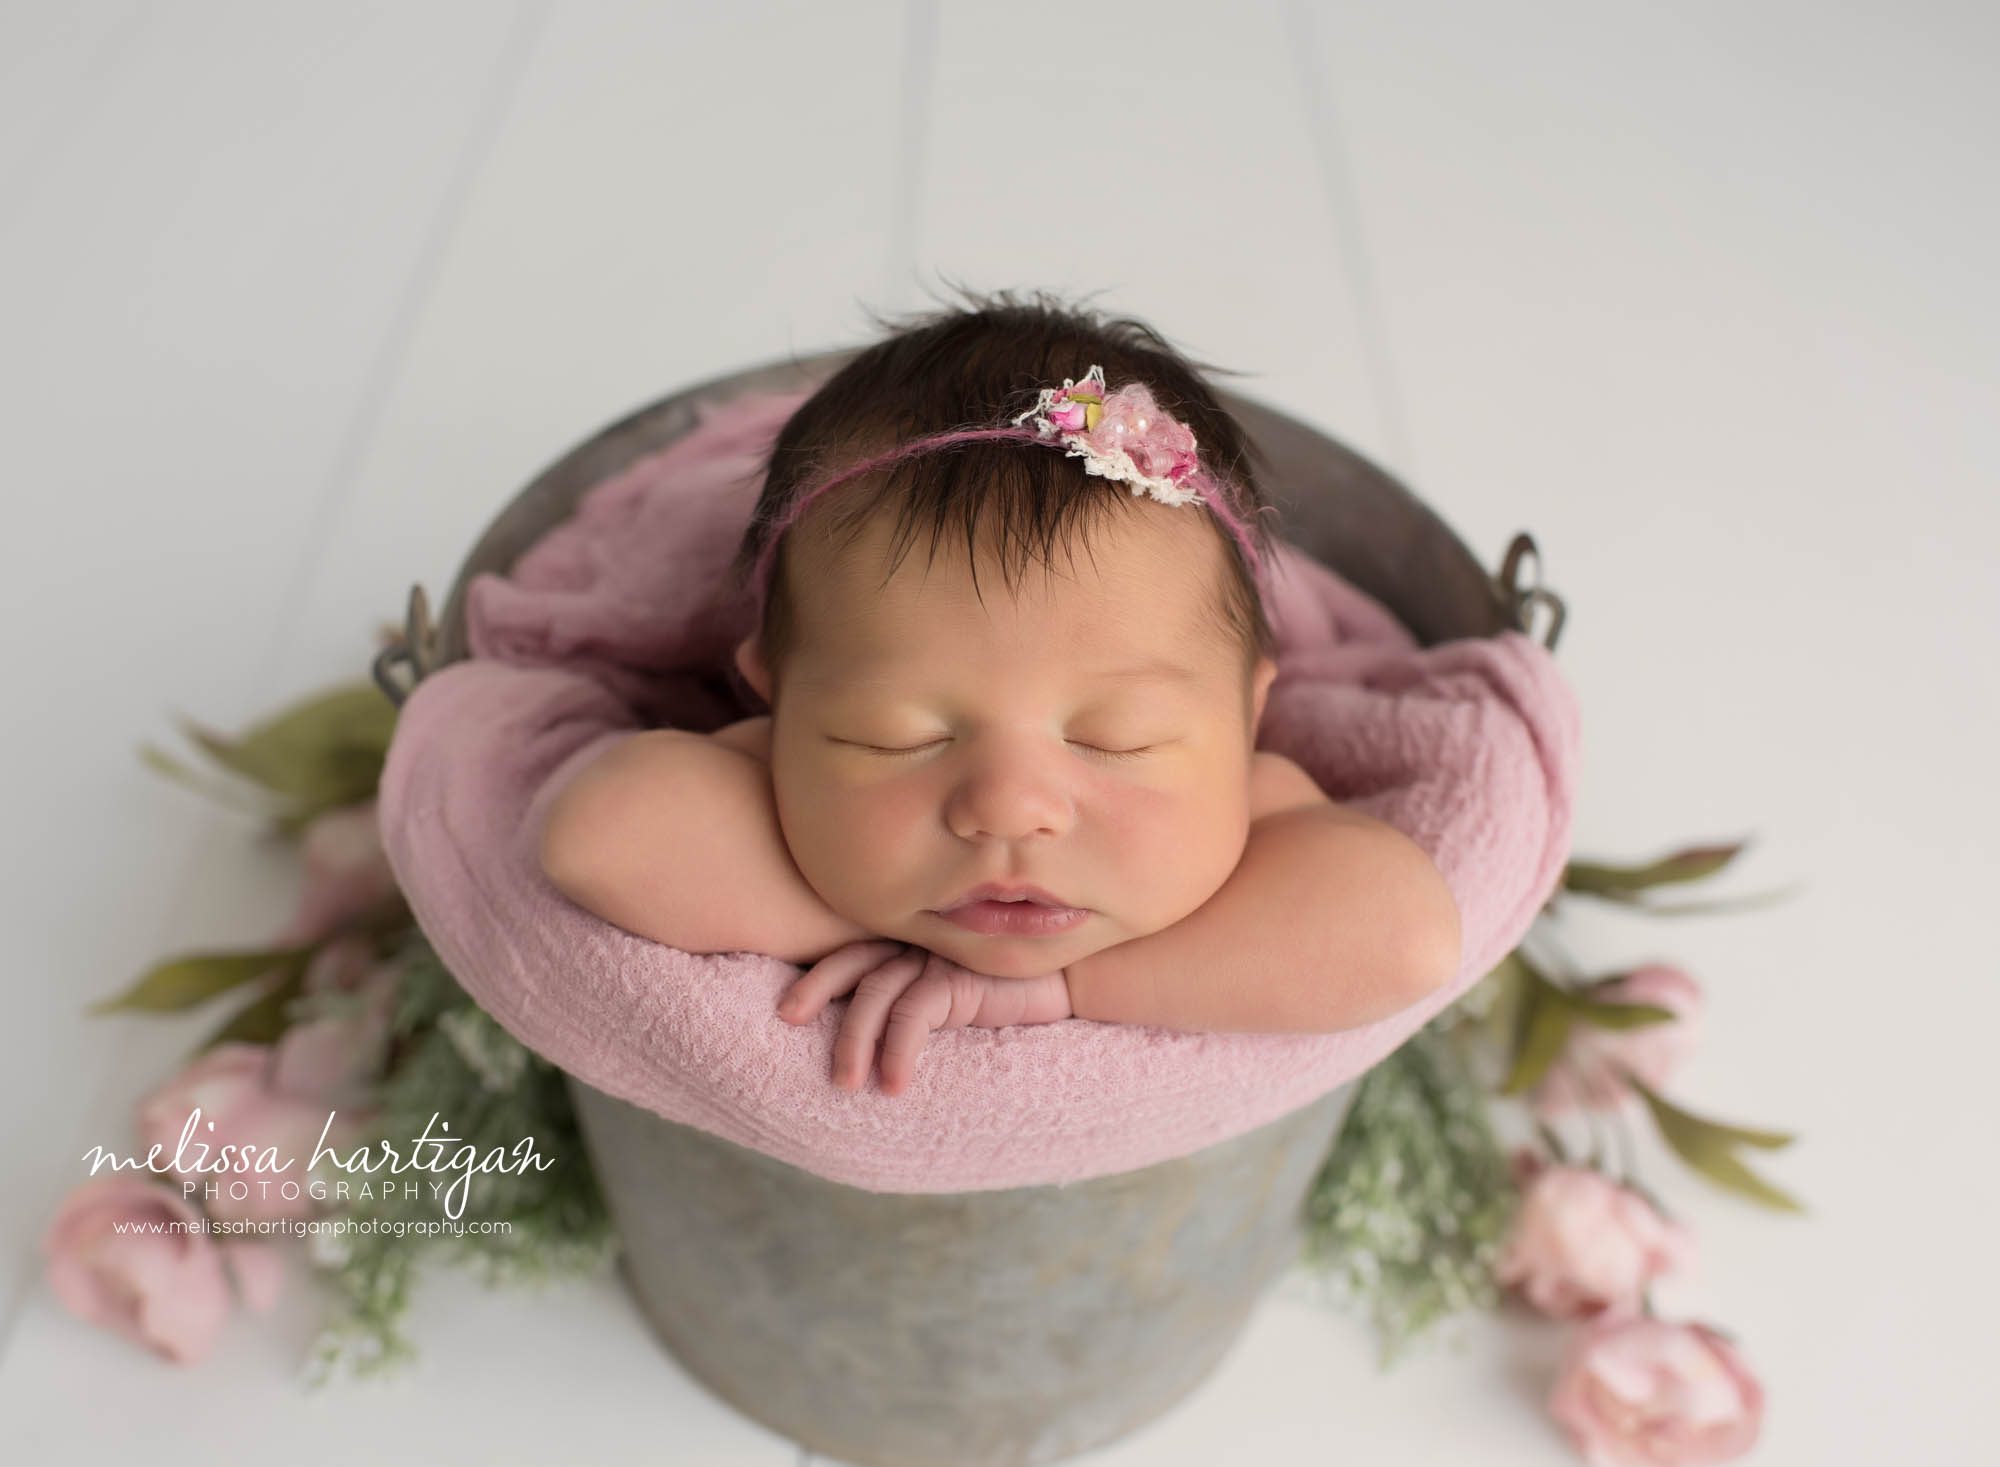 newborn baby girl posed in metal bucket with lavender layer wrpa and headband Newborn photography CT south glastonbury